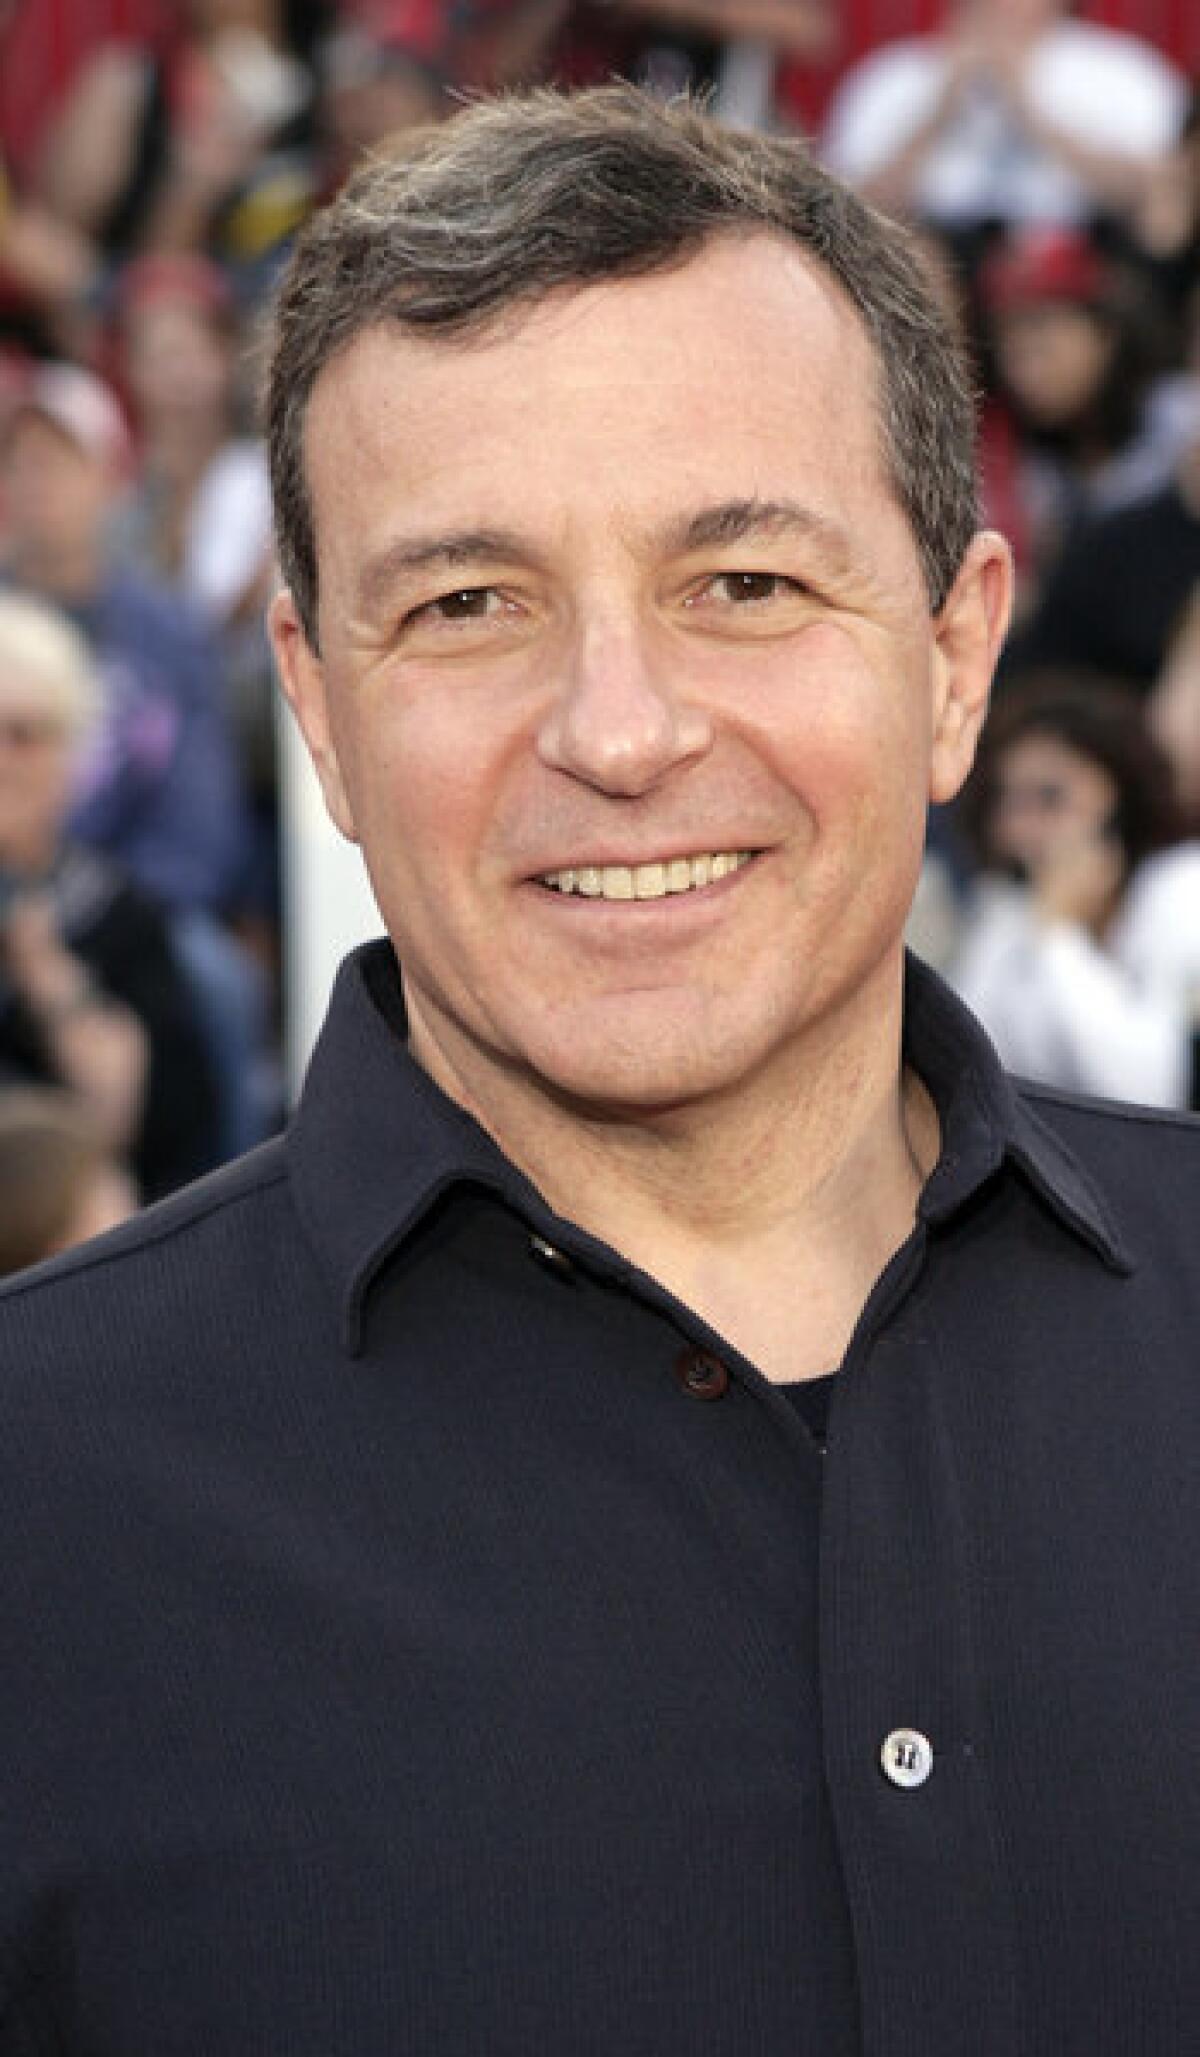 Walt Disney Co. Chairman and Chief Executive Robert Iger made $37.7 million in mid-May by exercising stock options.